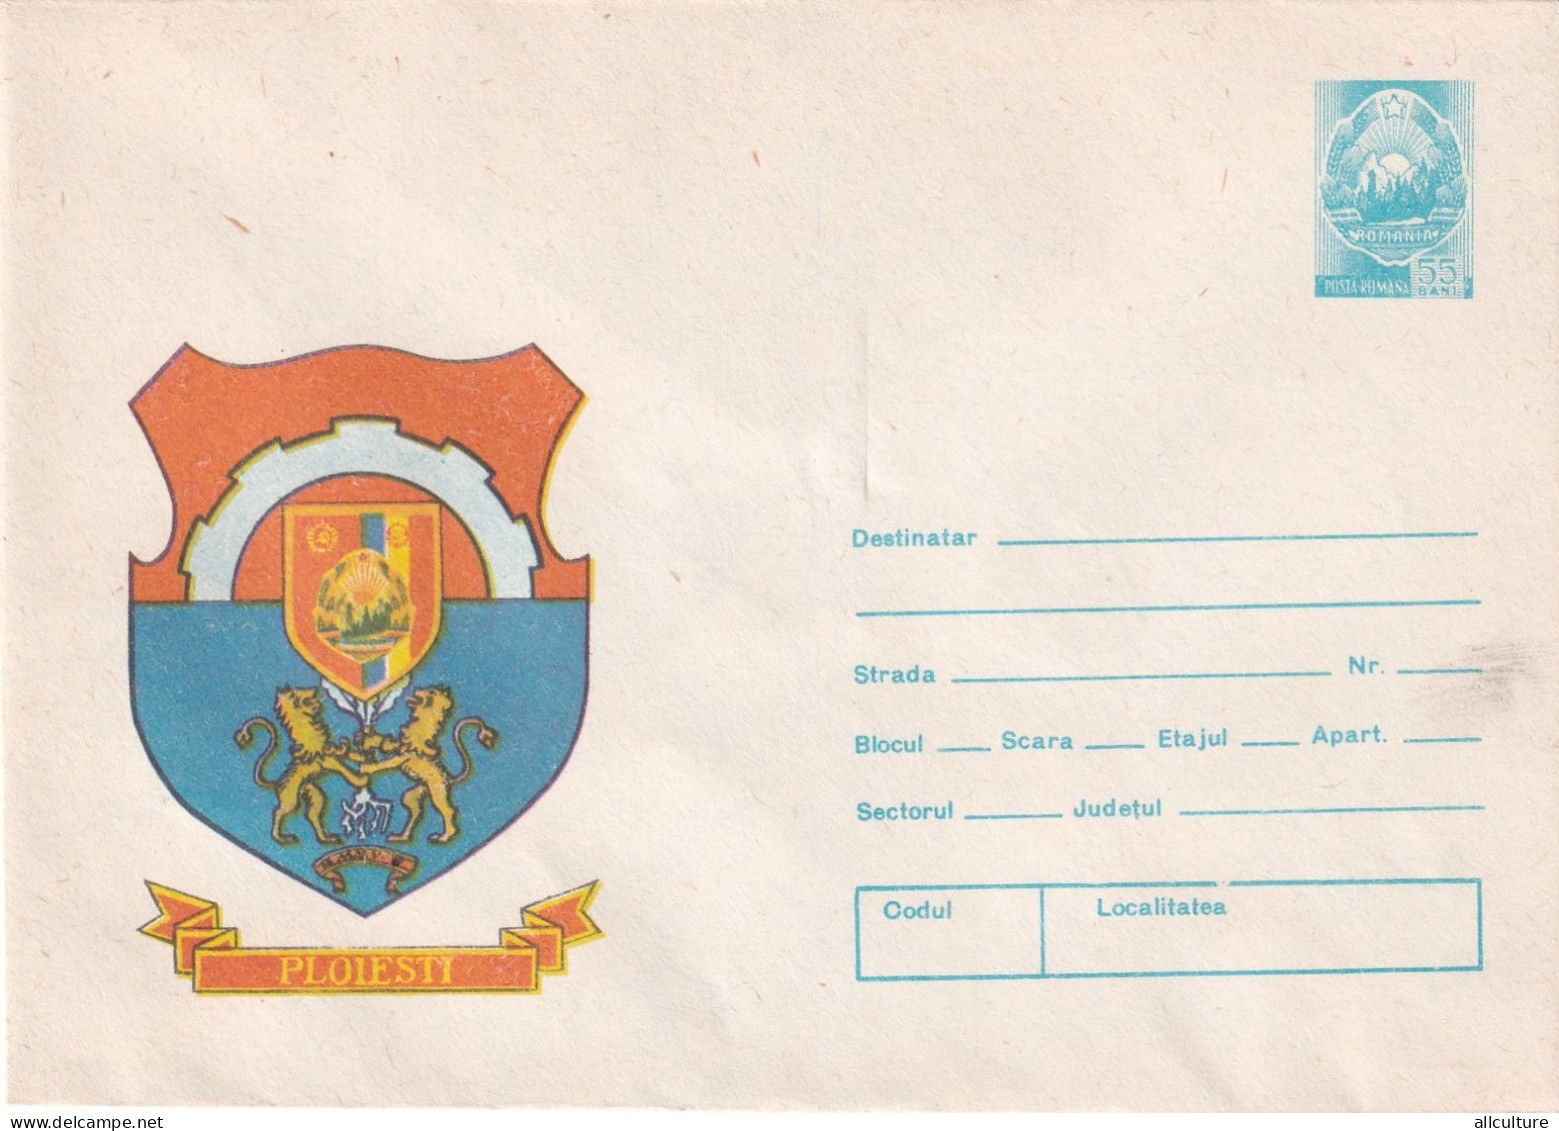 A24582 - PLOIESTI Cover Stationery Perfect Shape Unused 1980 - Postal Stationery